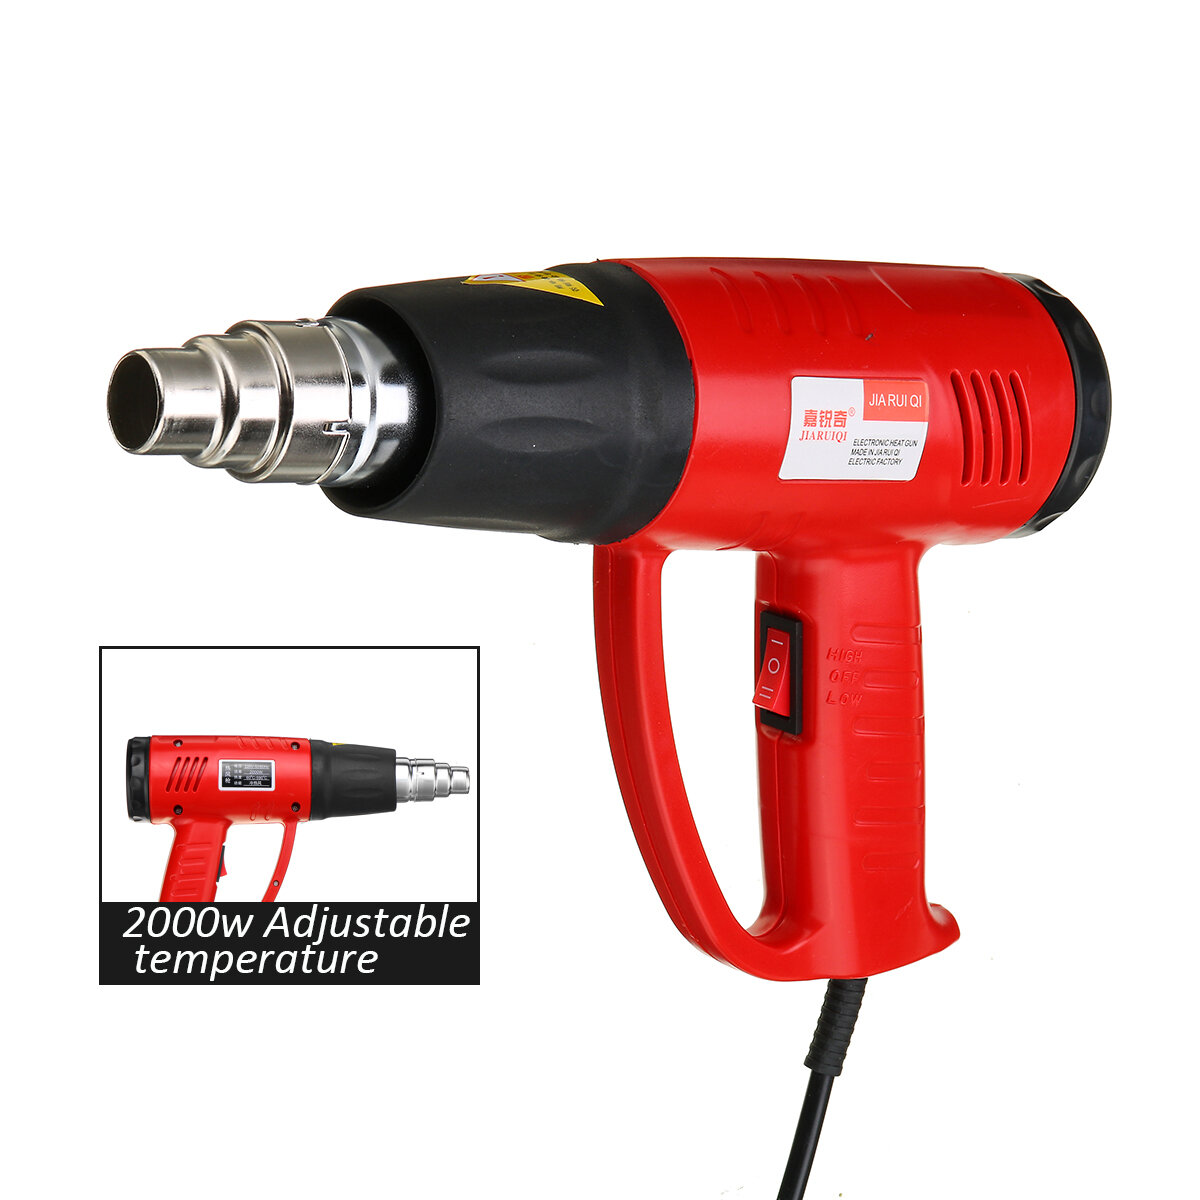 best price,2000w,hot,air,tool,discount